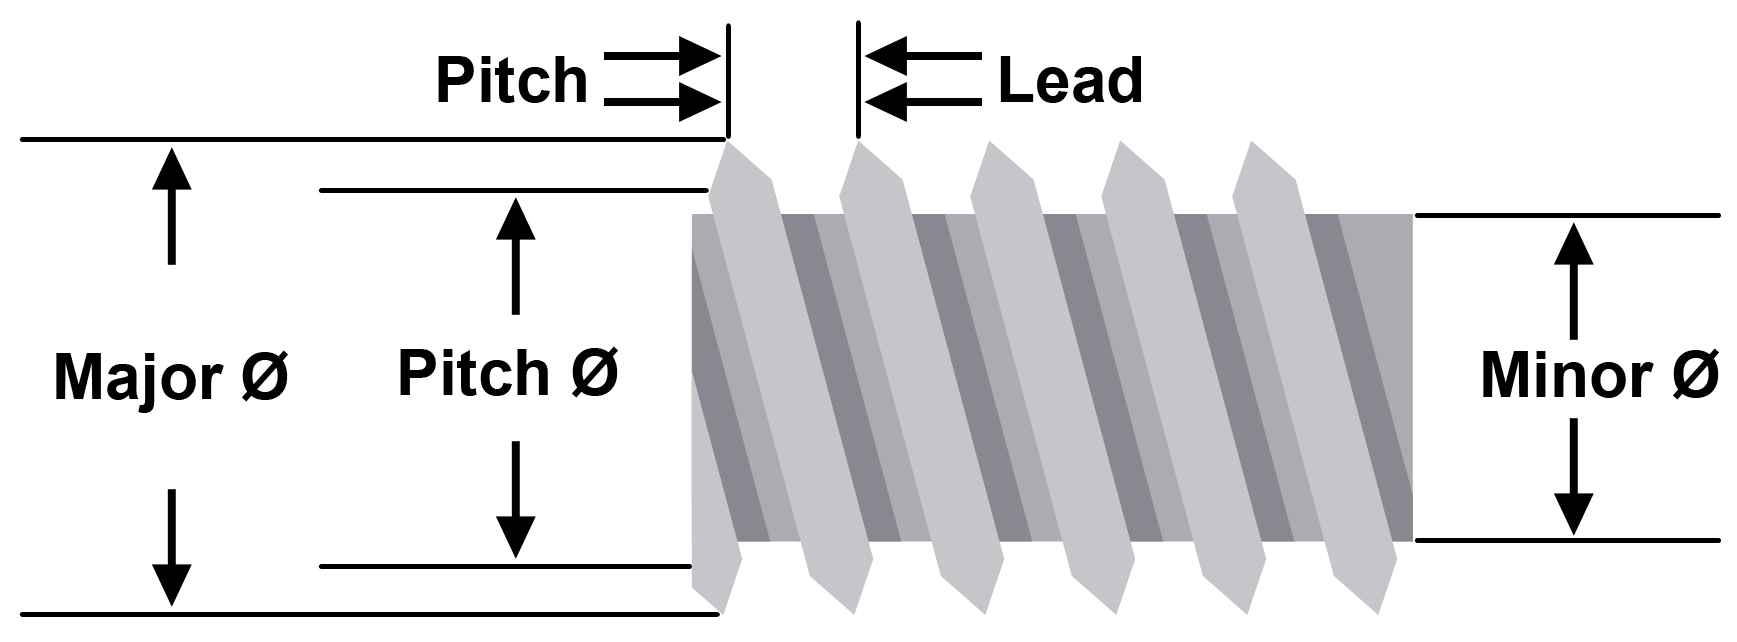 Illustration of the threaded shaft with the pitch and lead screw